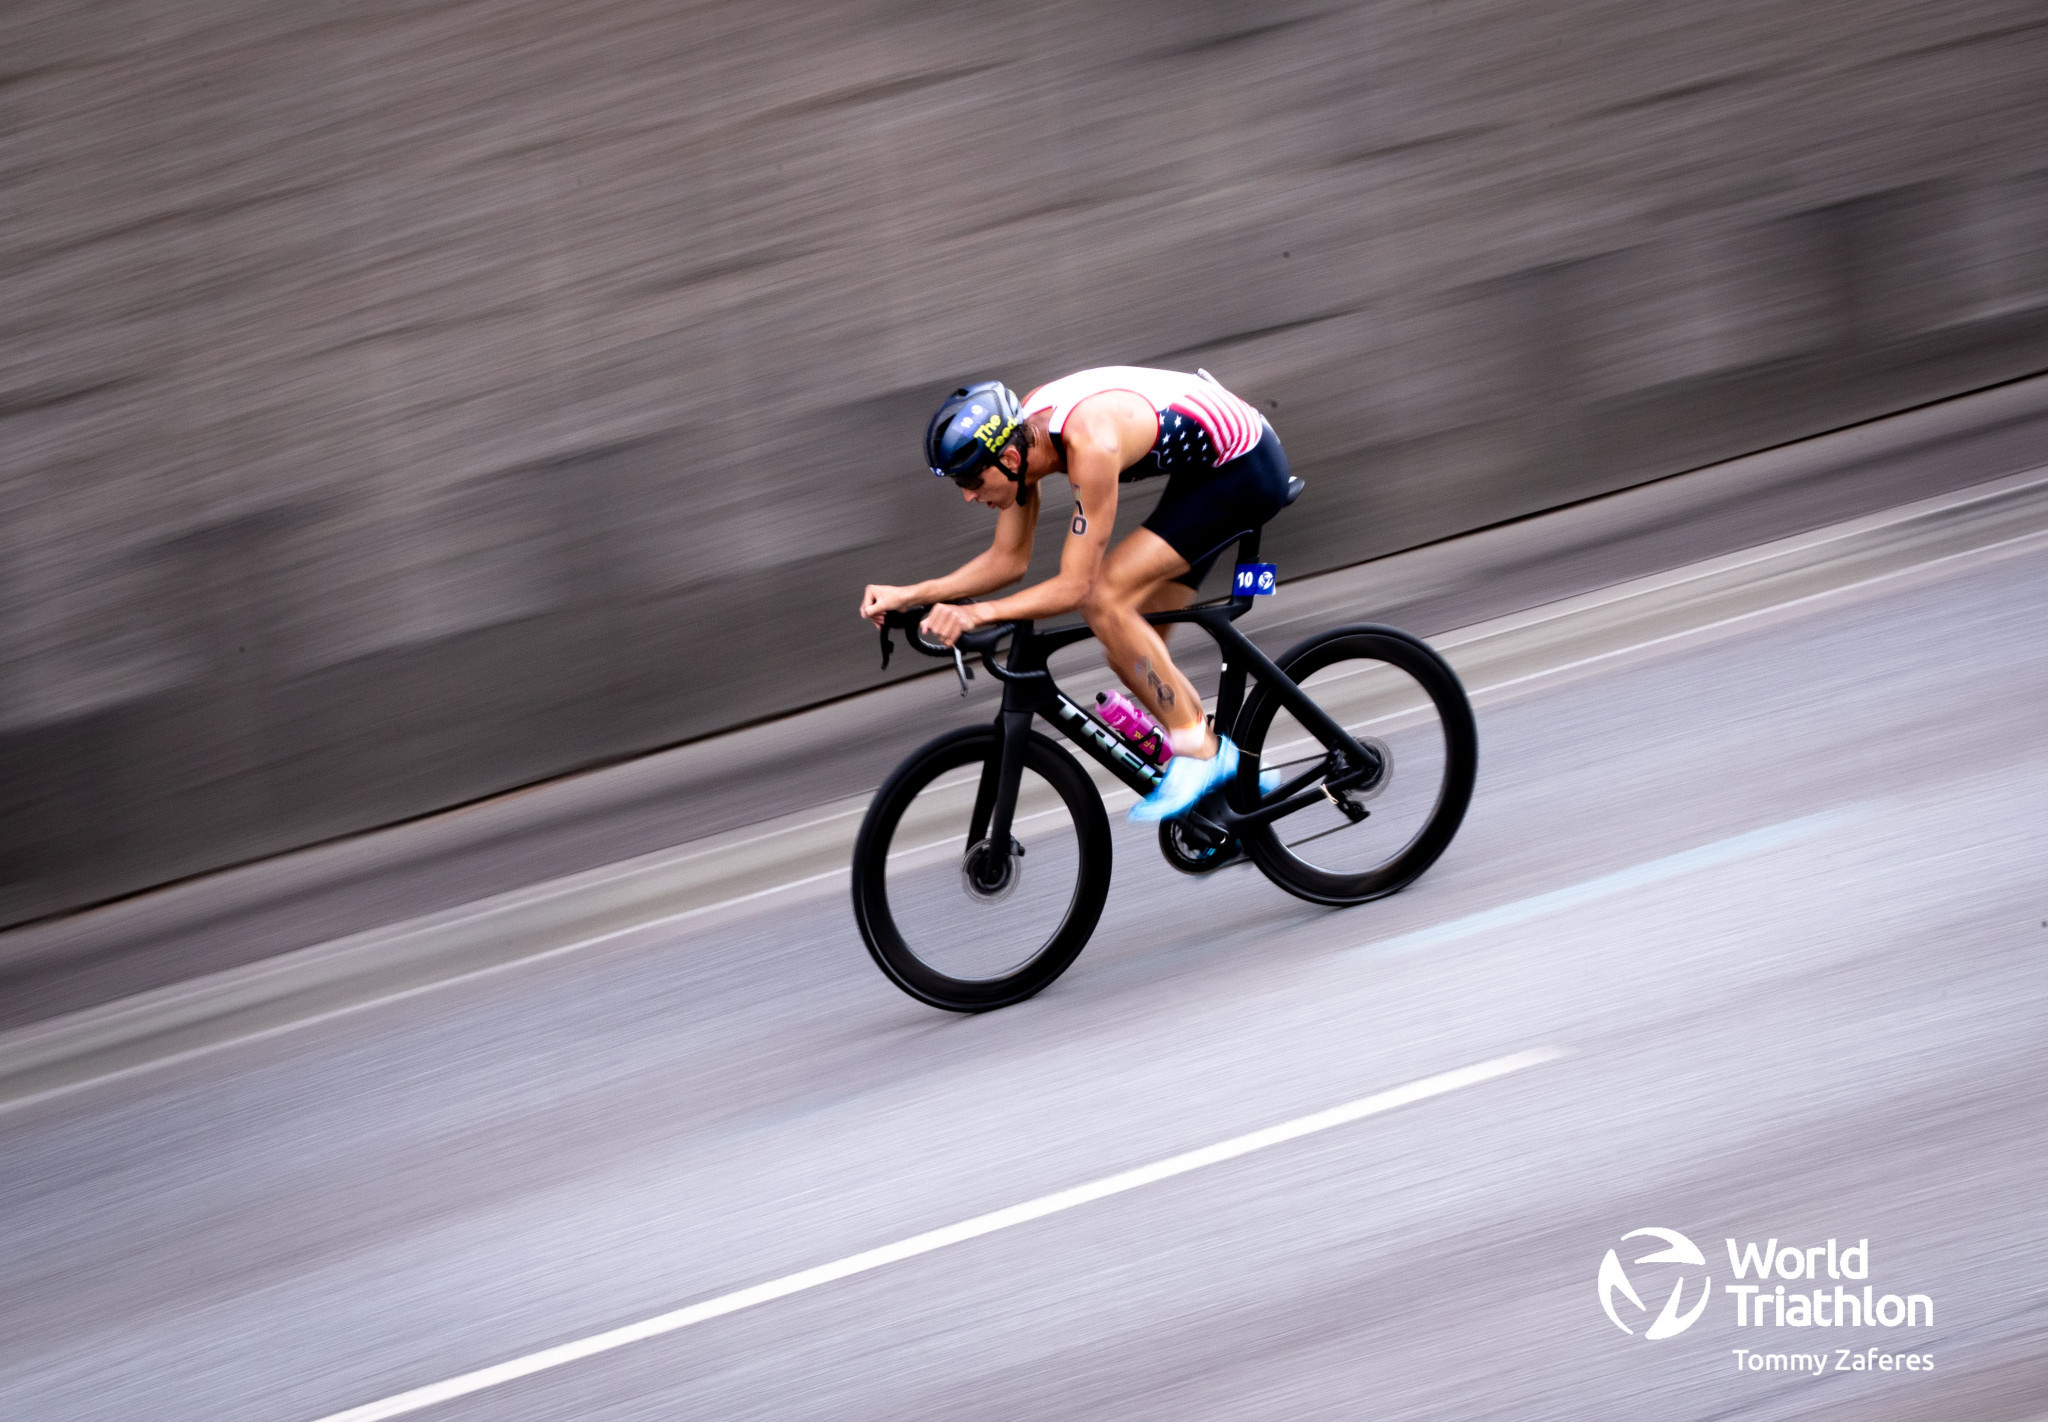 Competition is set to continue tomorrow with the beginning of the elite men's and women's events ©World Triathlon